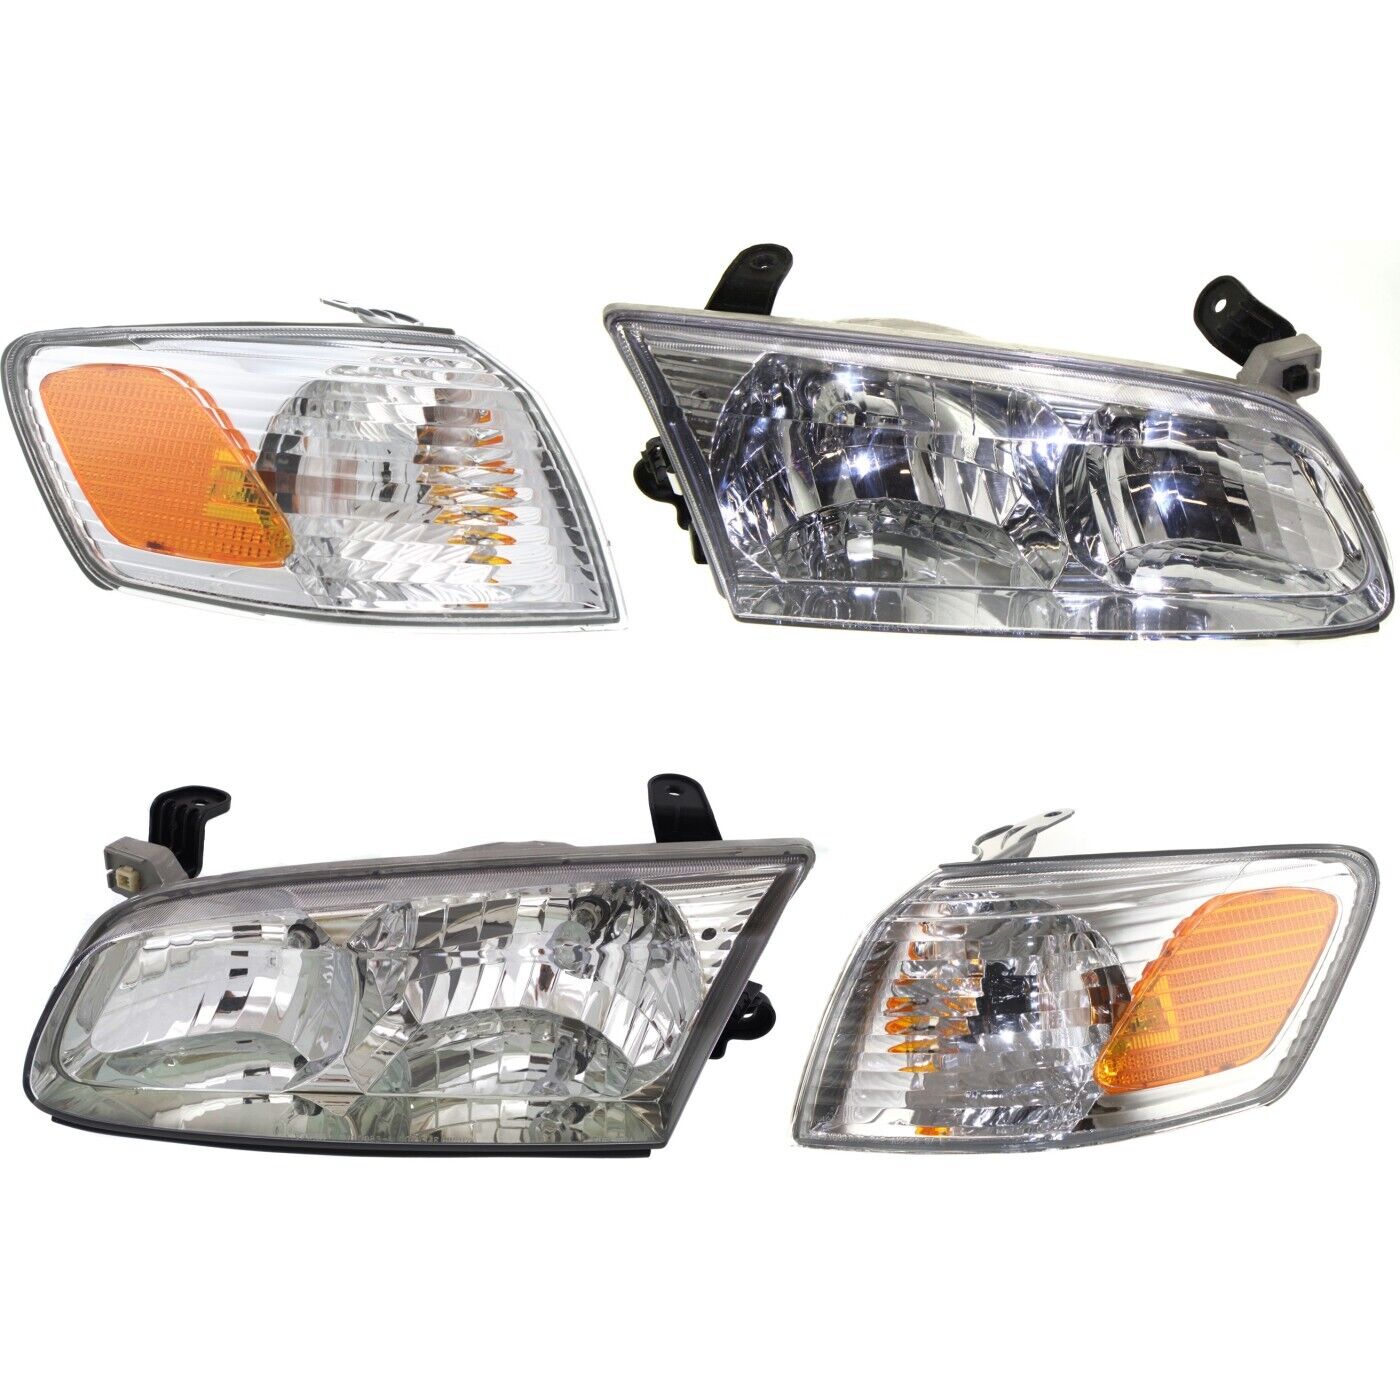 Headlights Head Lamp Kit For 2000-2001 Toyota Camry with Corner Lights Set of 4